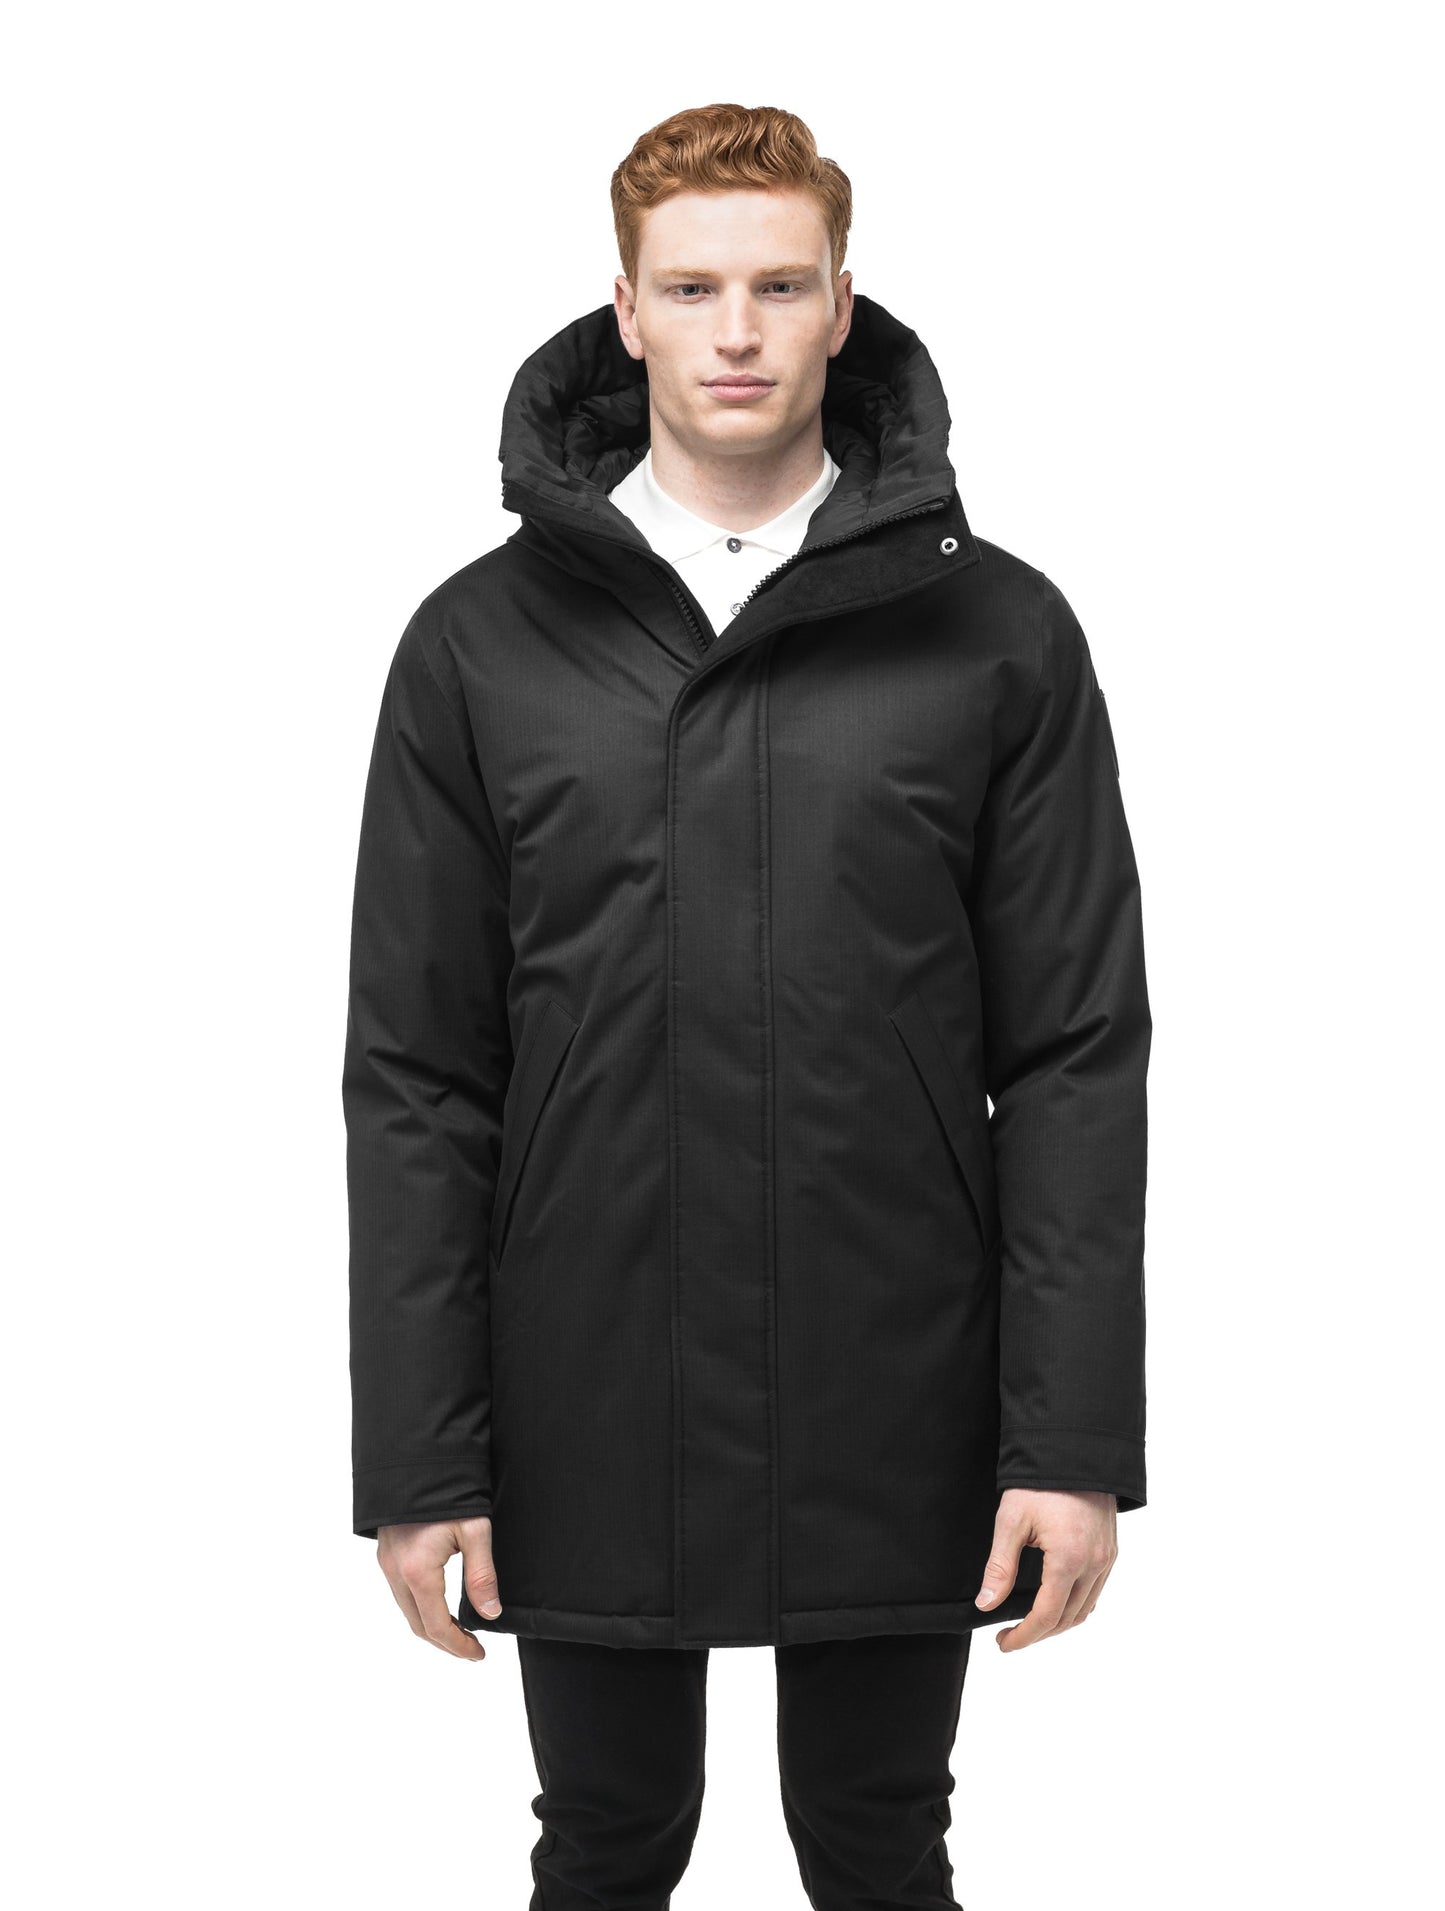 Pierre Men's Jacket in thigh length, Canadian white duck down insulation, non-removable down-filled hood, angled waist pockets, centre-front zipper with wind flap, and elastic ribbed cuffs, in Black